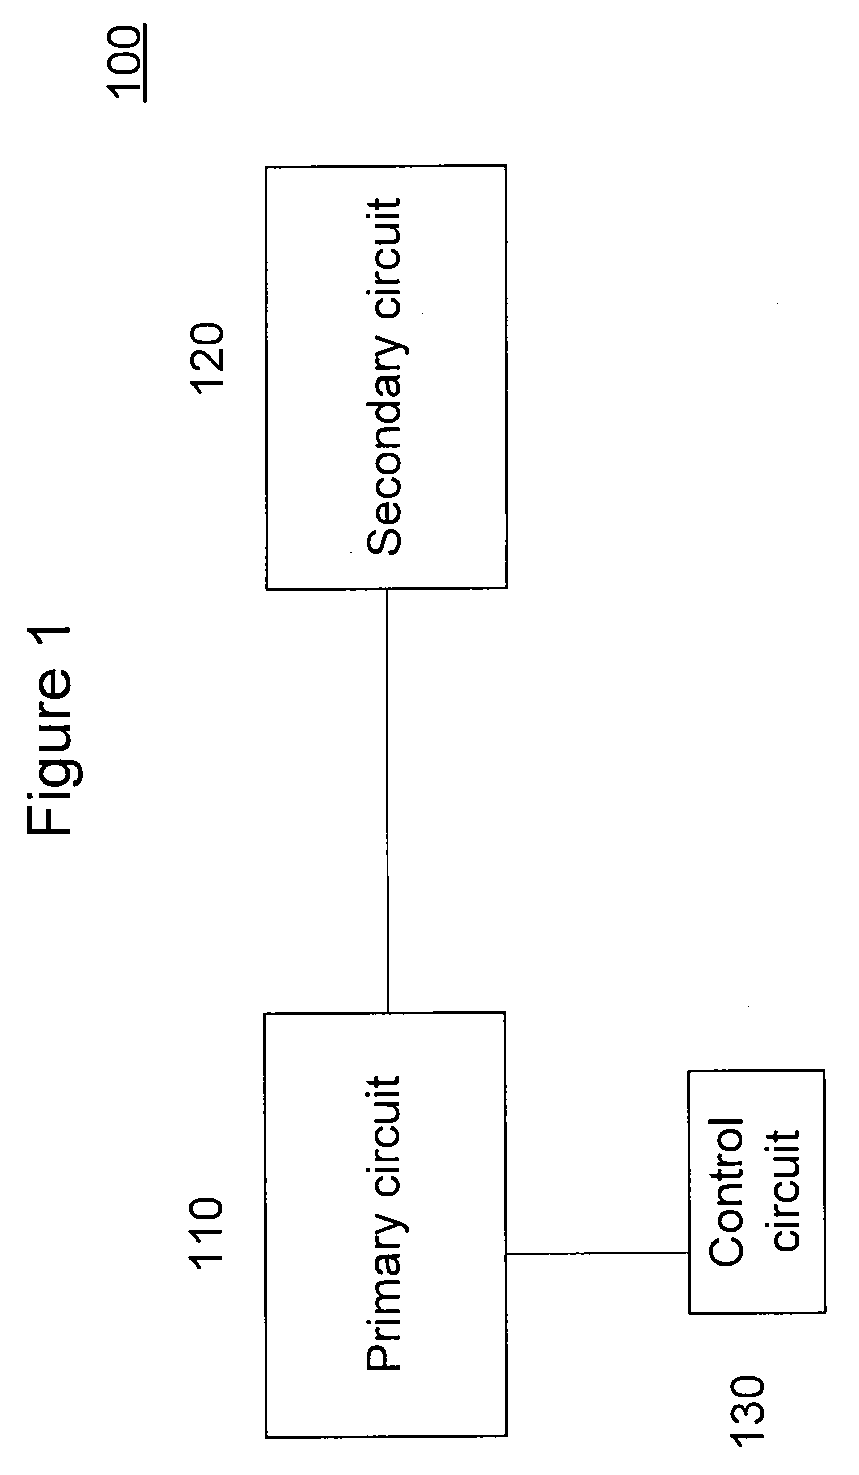 Primary side control circuit and method for ultra-low idle power operation